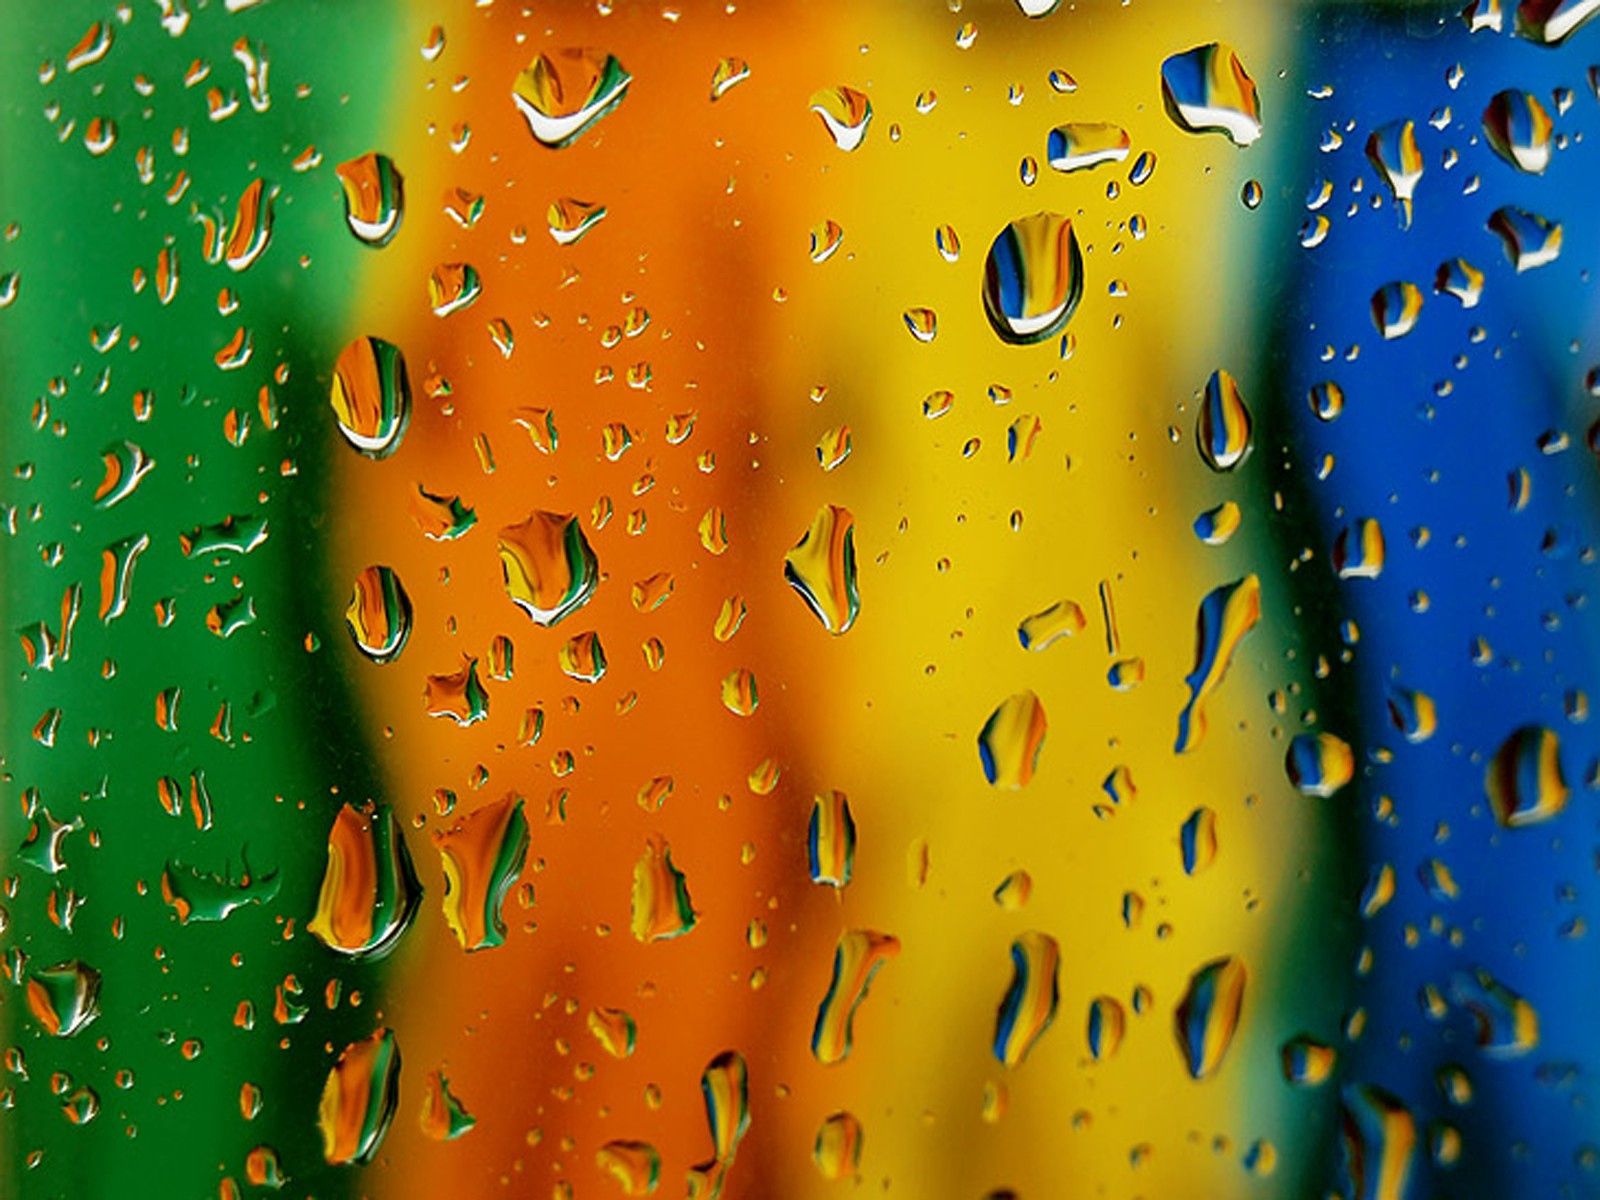 multicolored, motley, drops, texture, textures, surface Free Stock Photo